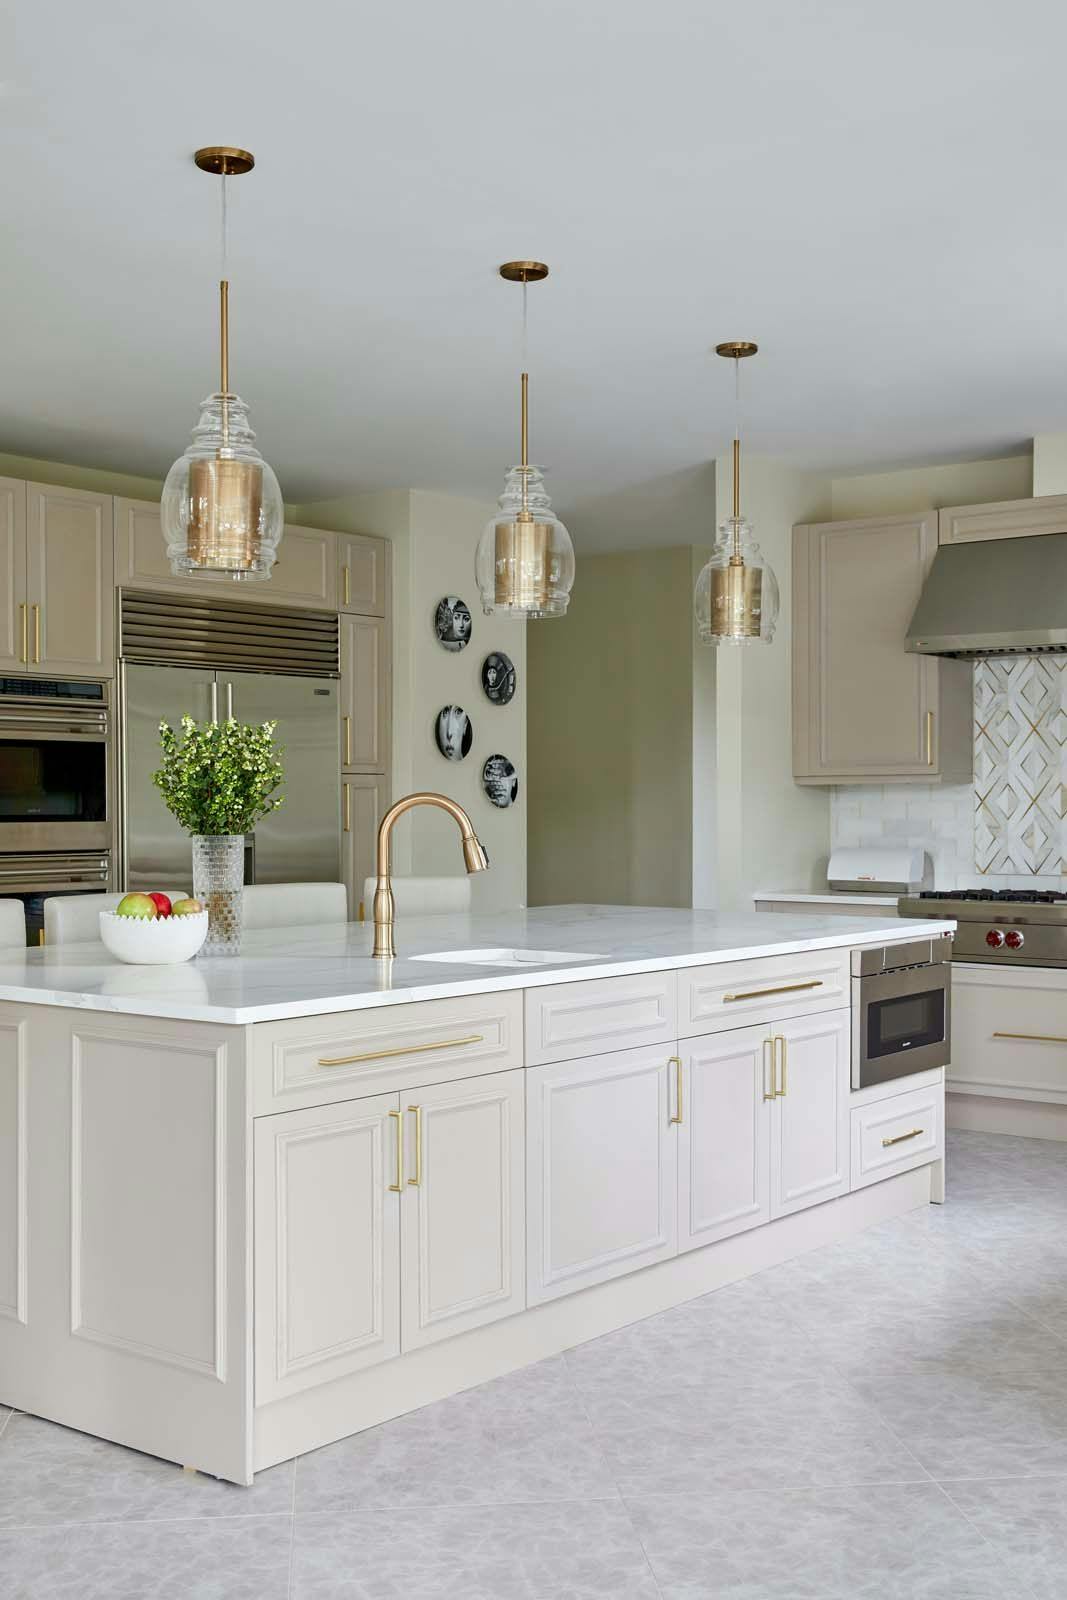 kitchen with off-white cabinets and golden accents